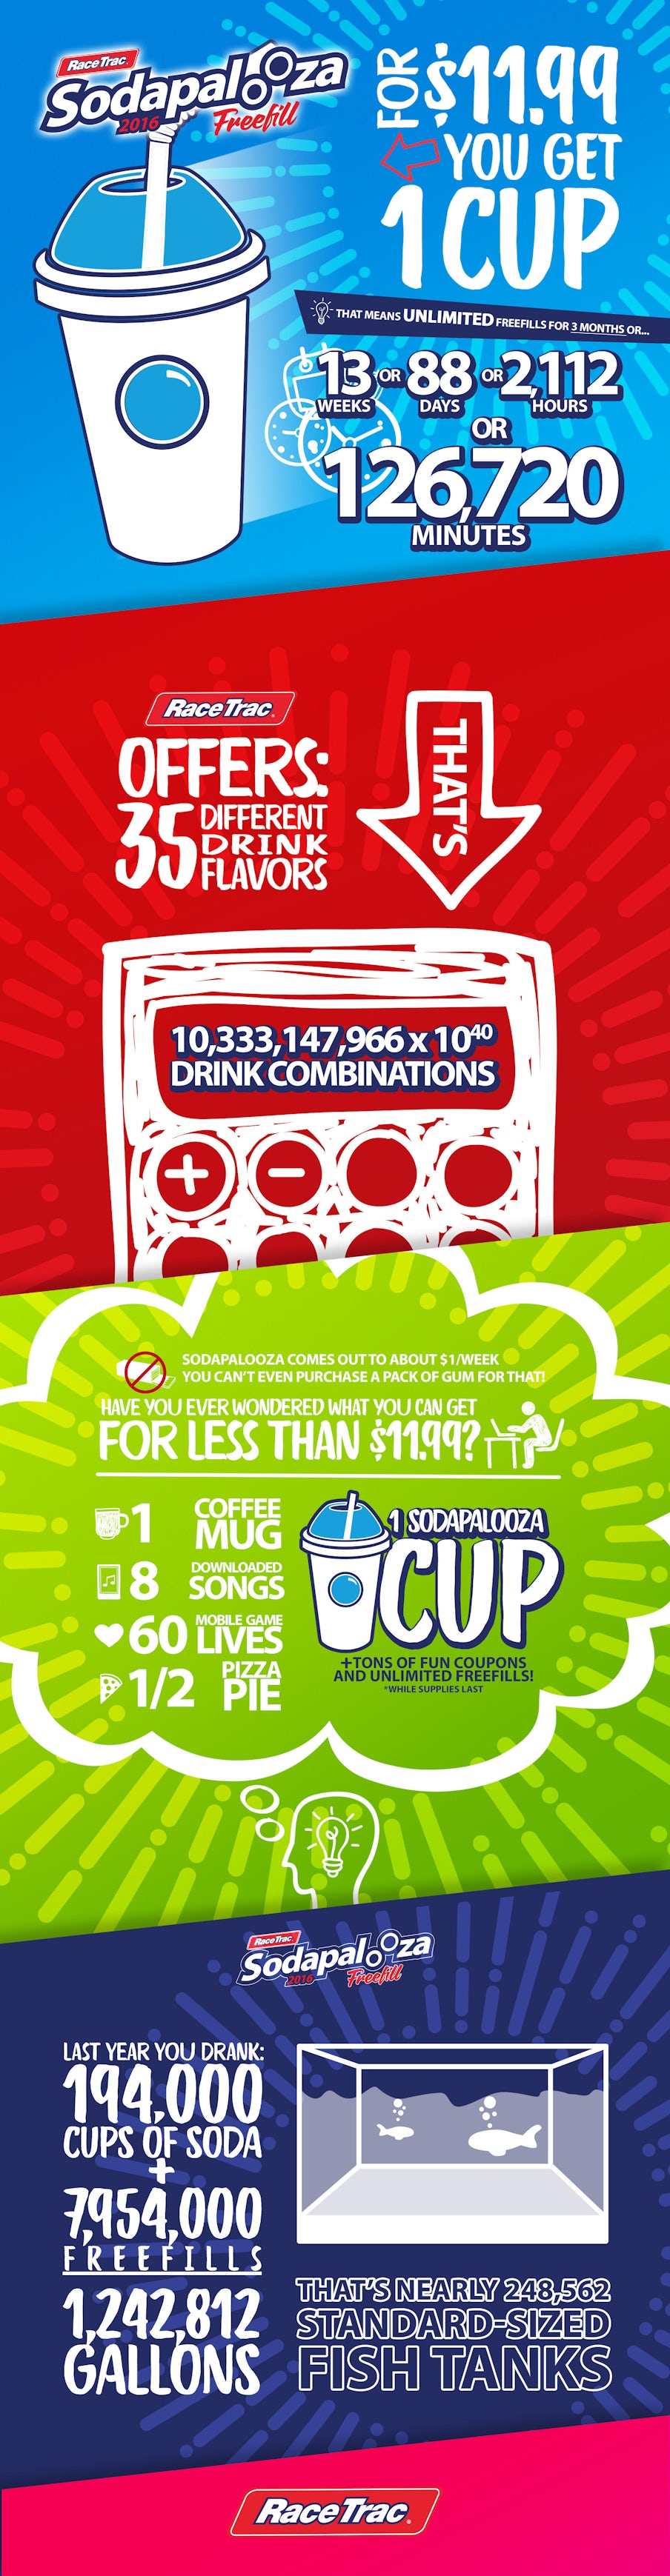 RaceTrac brings back unlimited drink refills with Sodapalooza | GuideLive